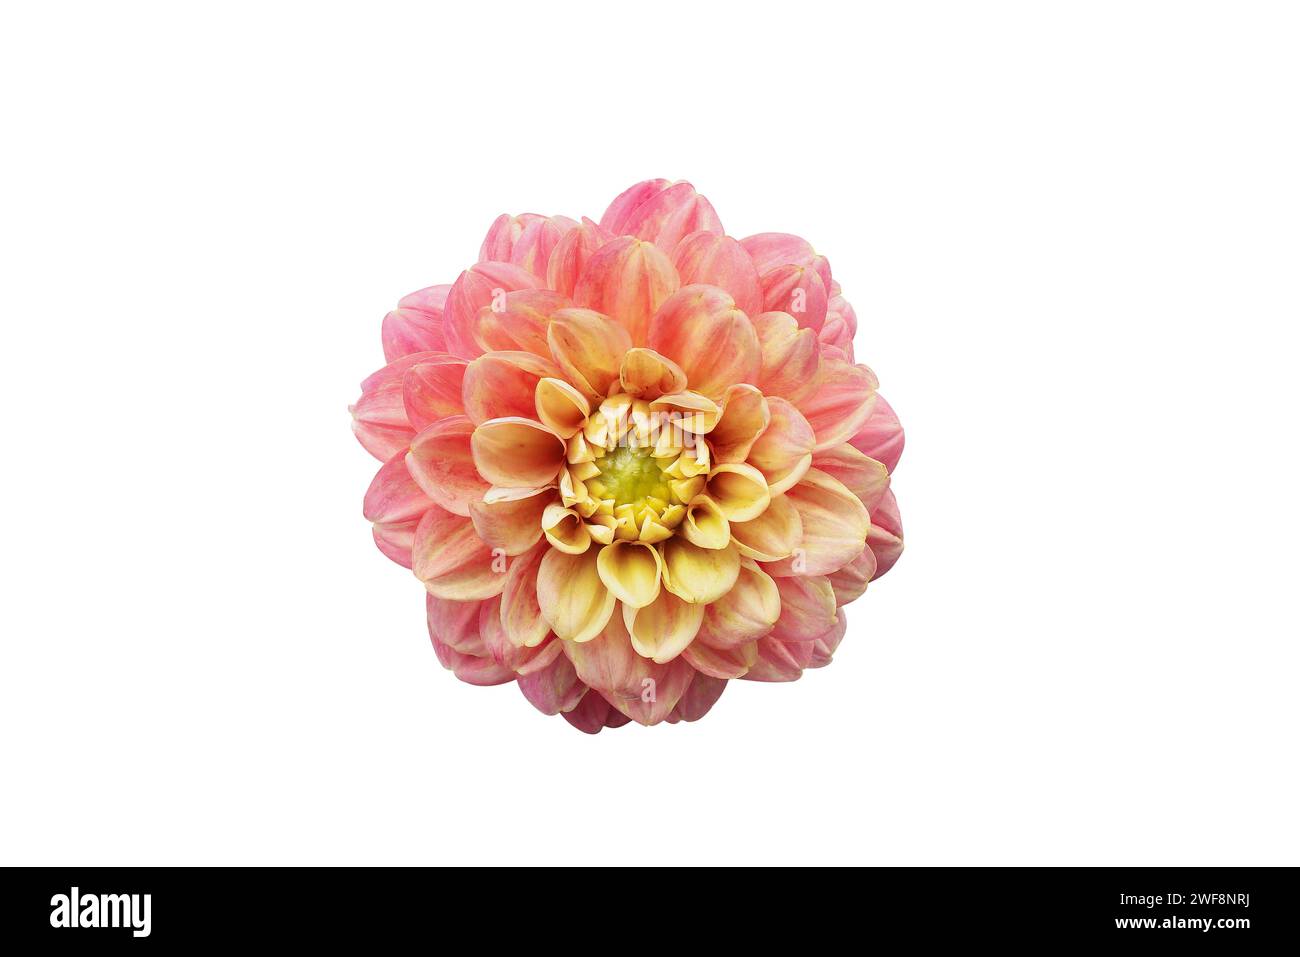 Colorful pink and yellow Dahlia flower isolated on a white background with clipping path. Stock Photo